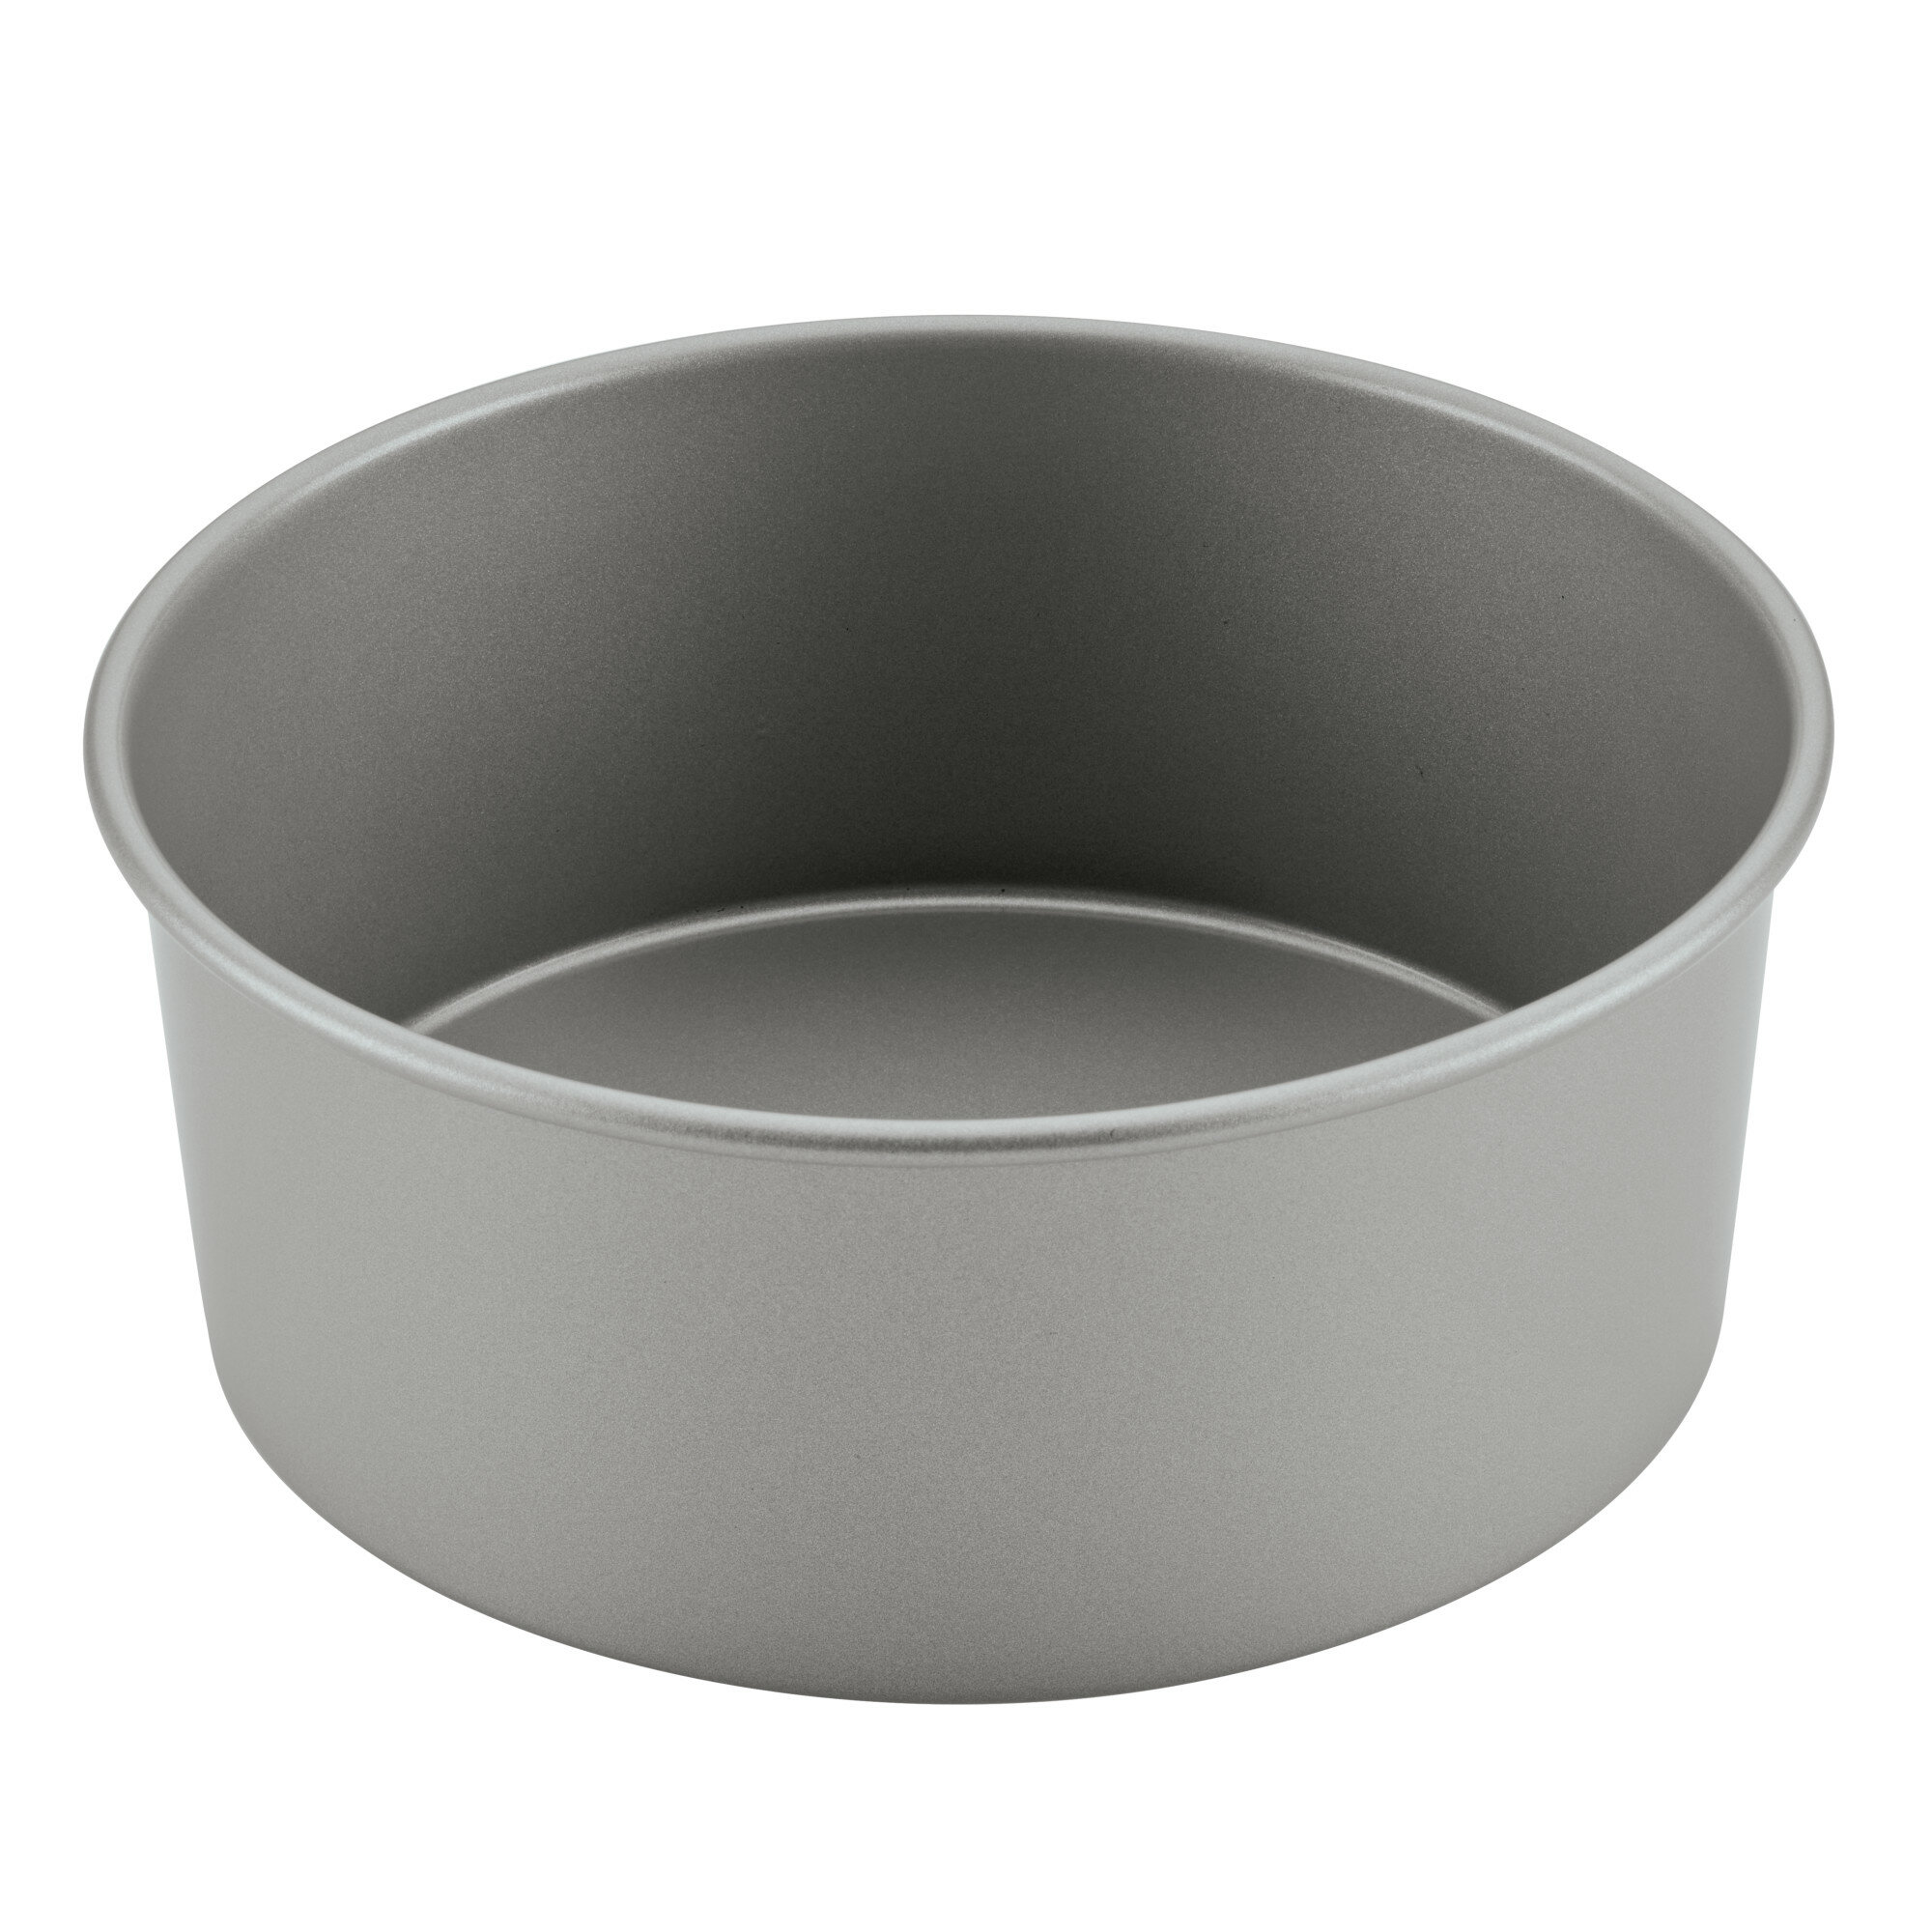 speciality cake pans